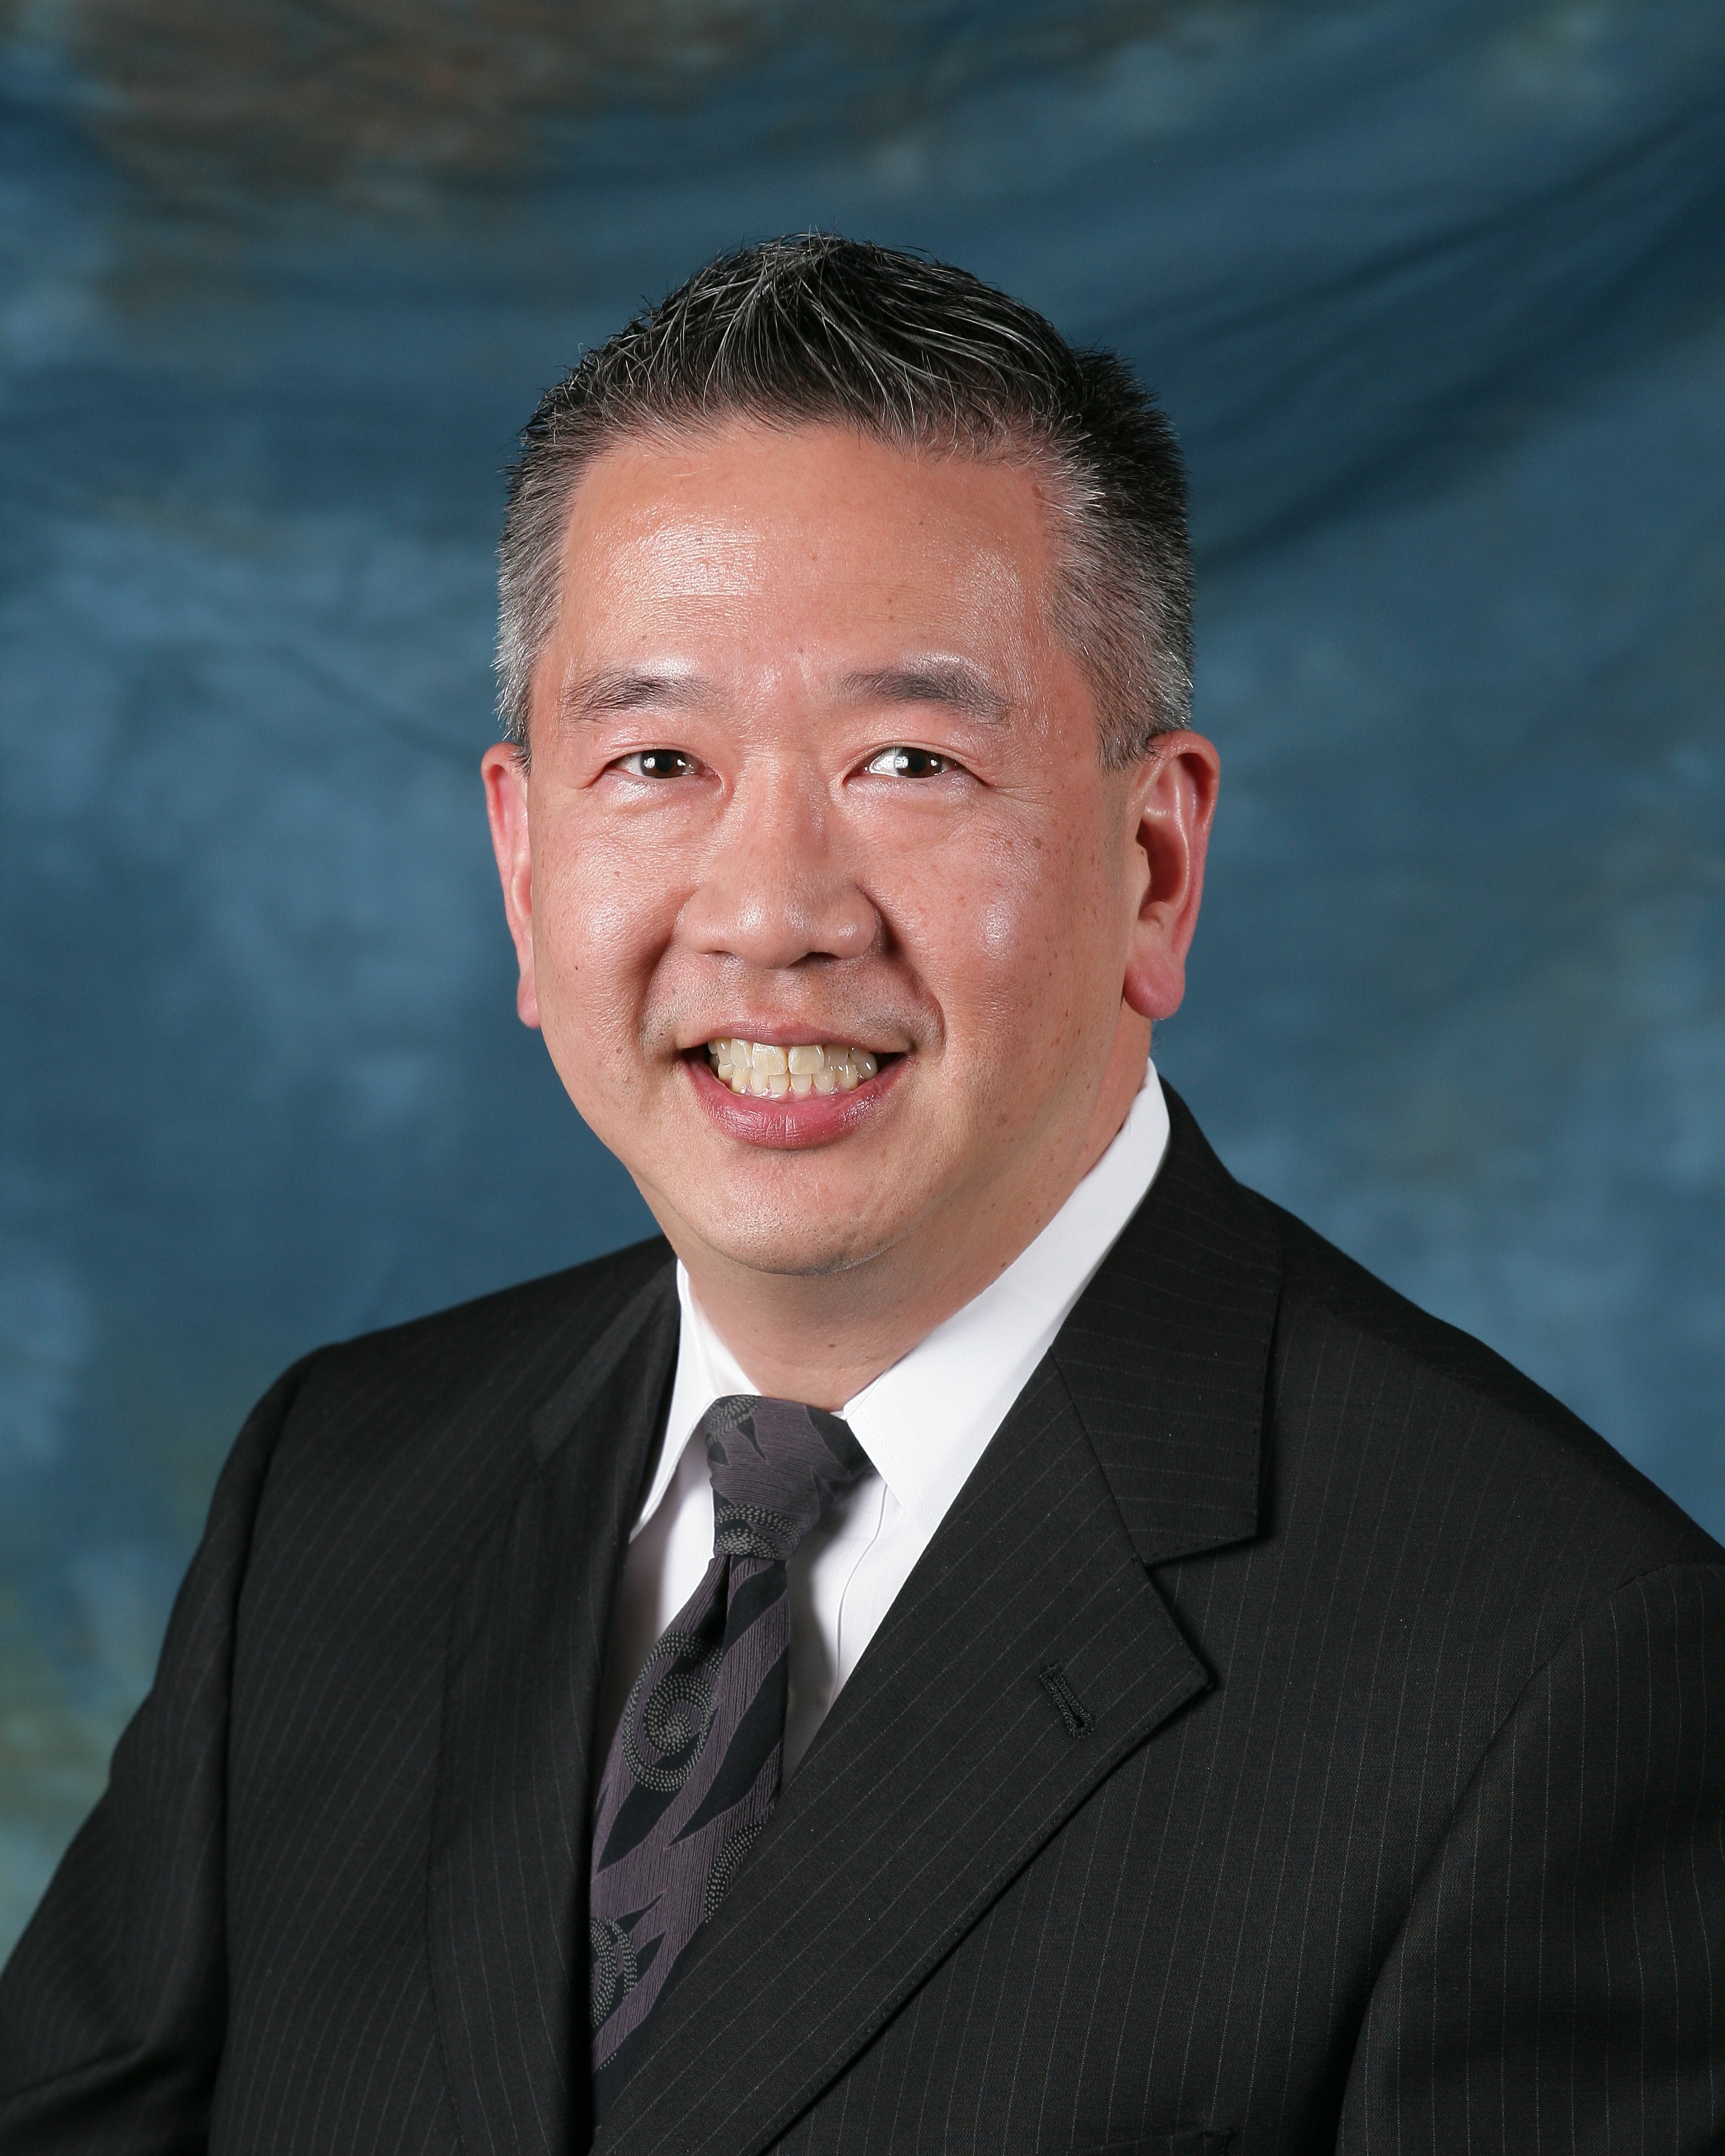 Steven Lee, MD St. Louis Ophthalmologist | Ophthalmology Consultants